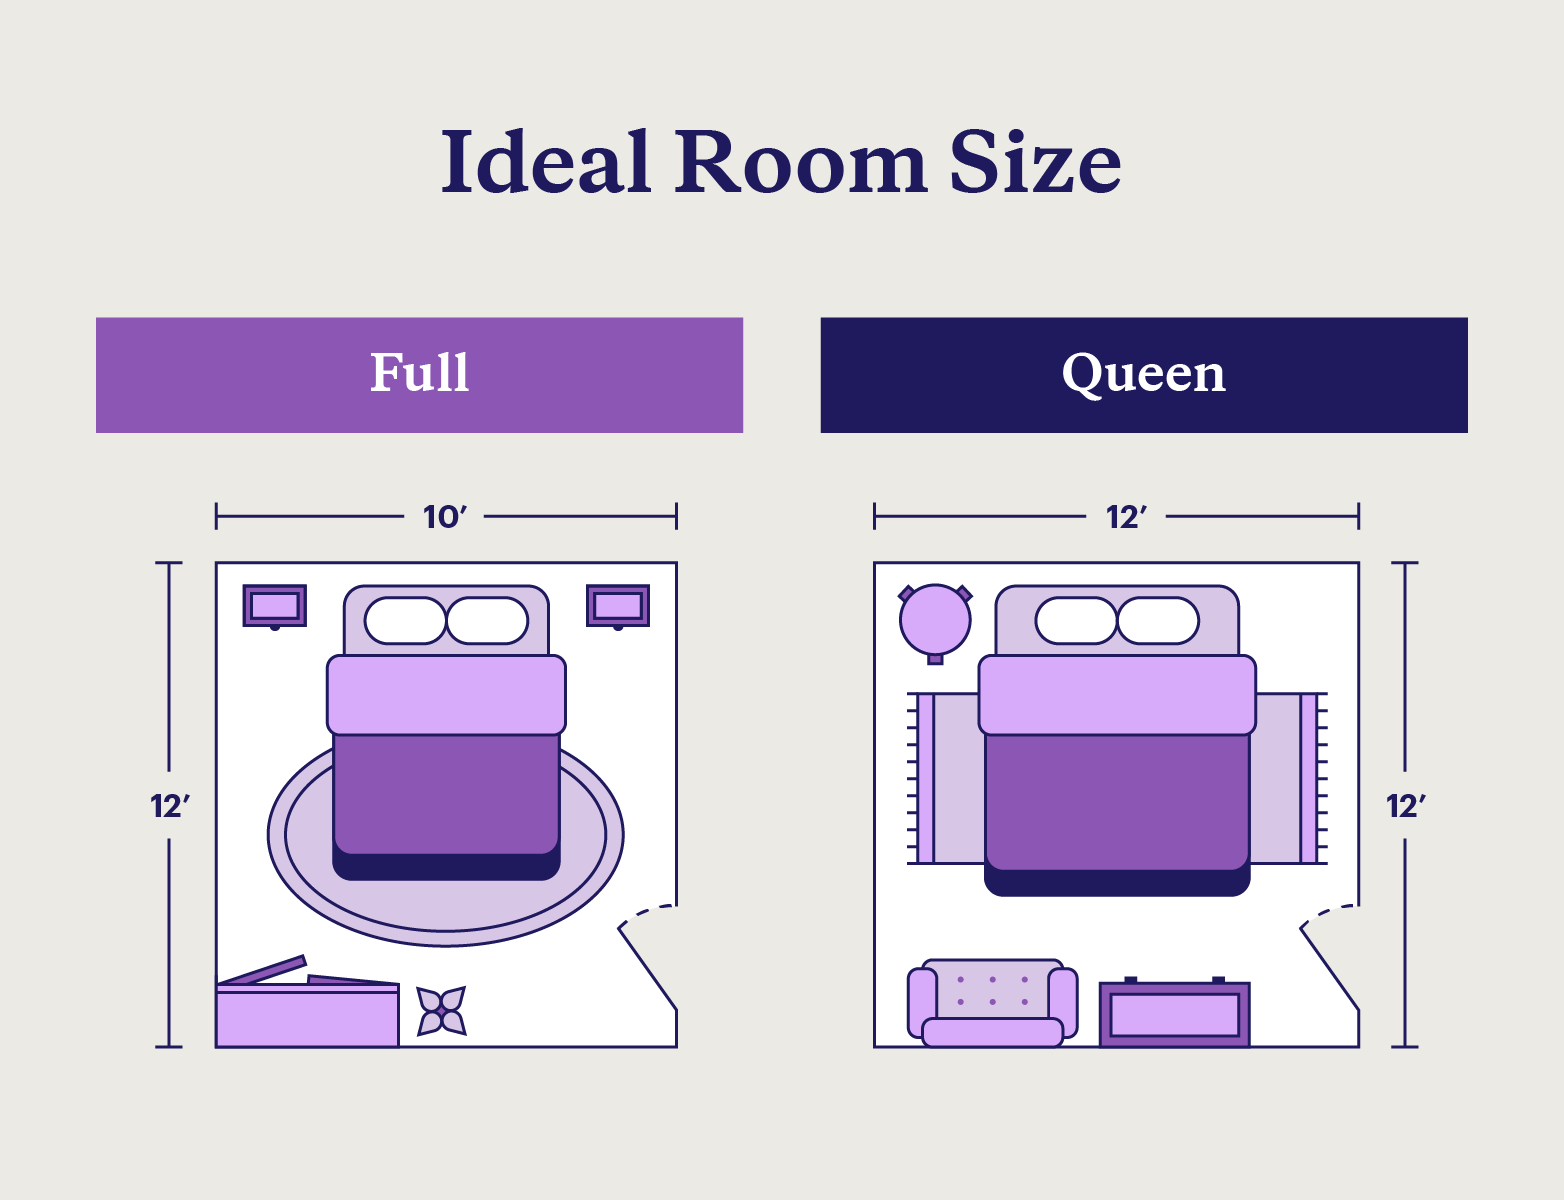 The ideal room sizes for full and queen size mattresses.